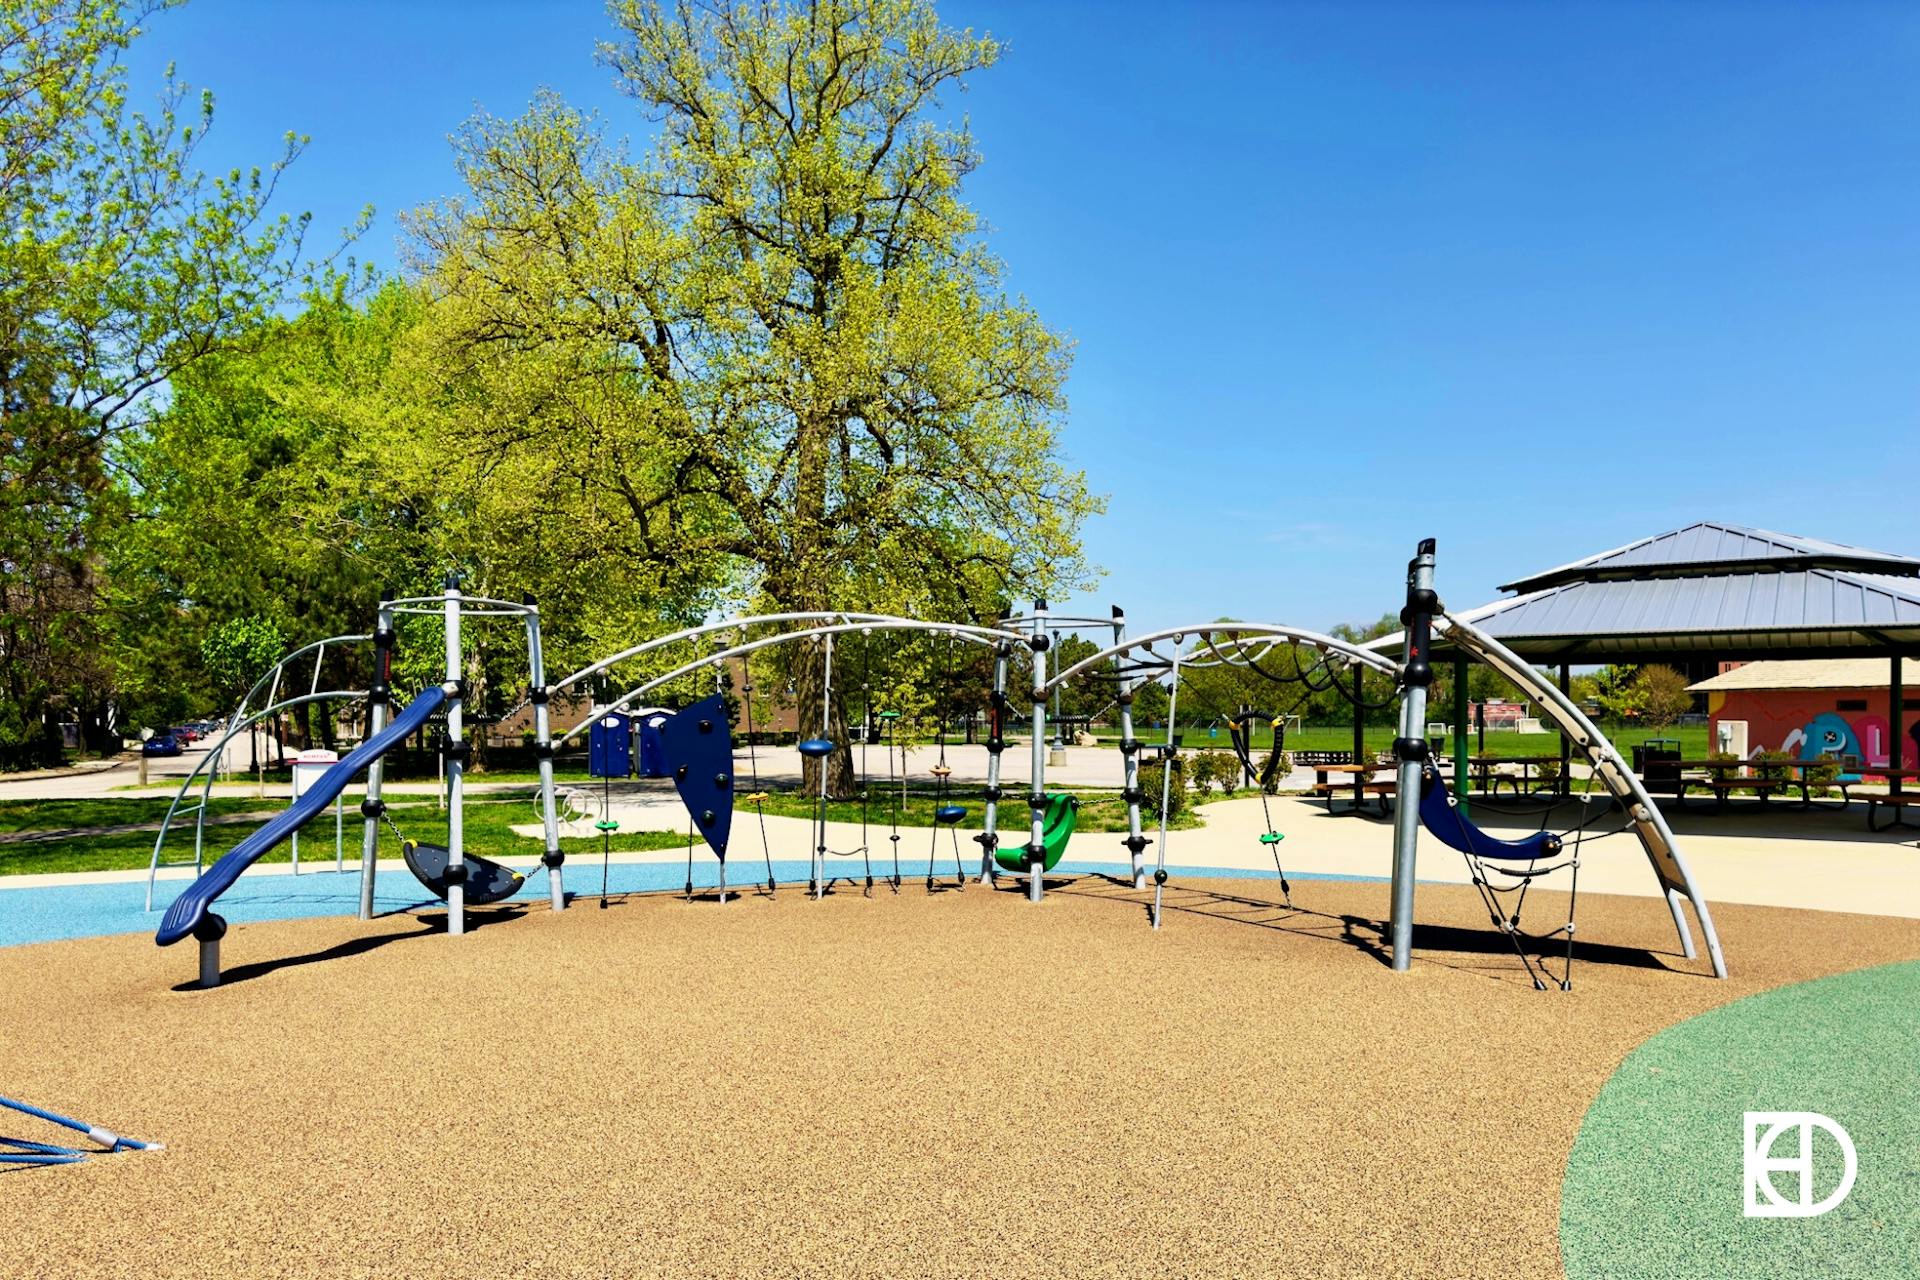 Photo of playground at O'Bannon Soccer Park